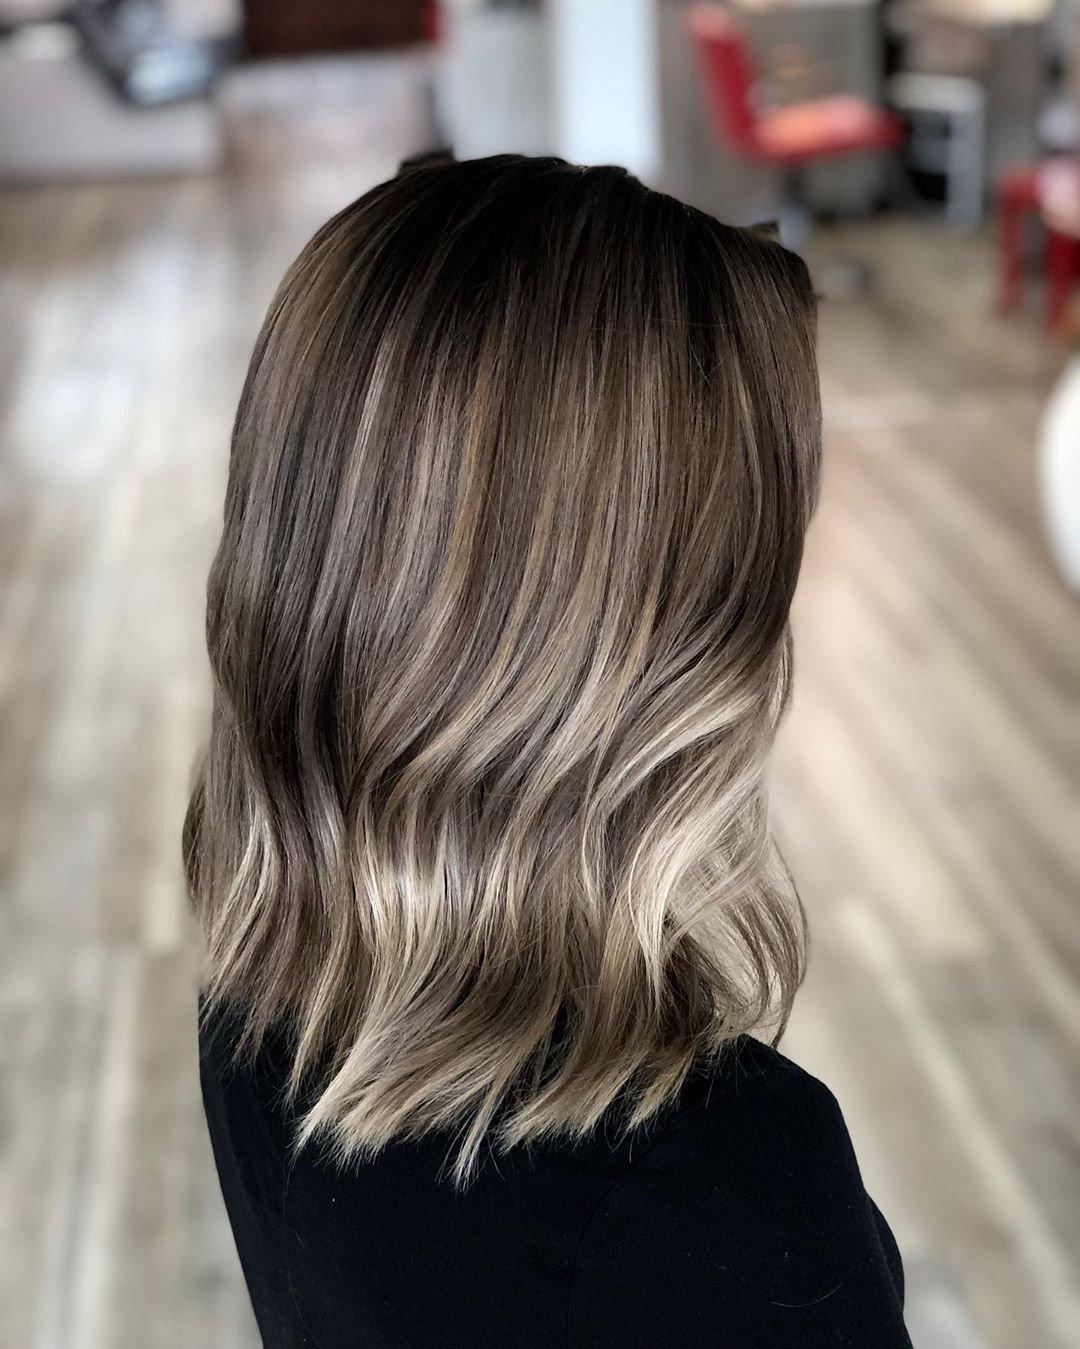 Mushroom Blonde Is The New Bronde And BRB I'm Running To The Salon Right Now